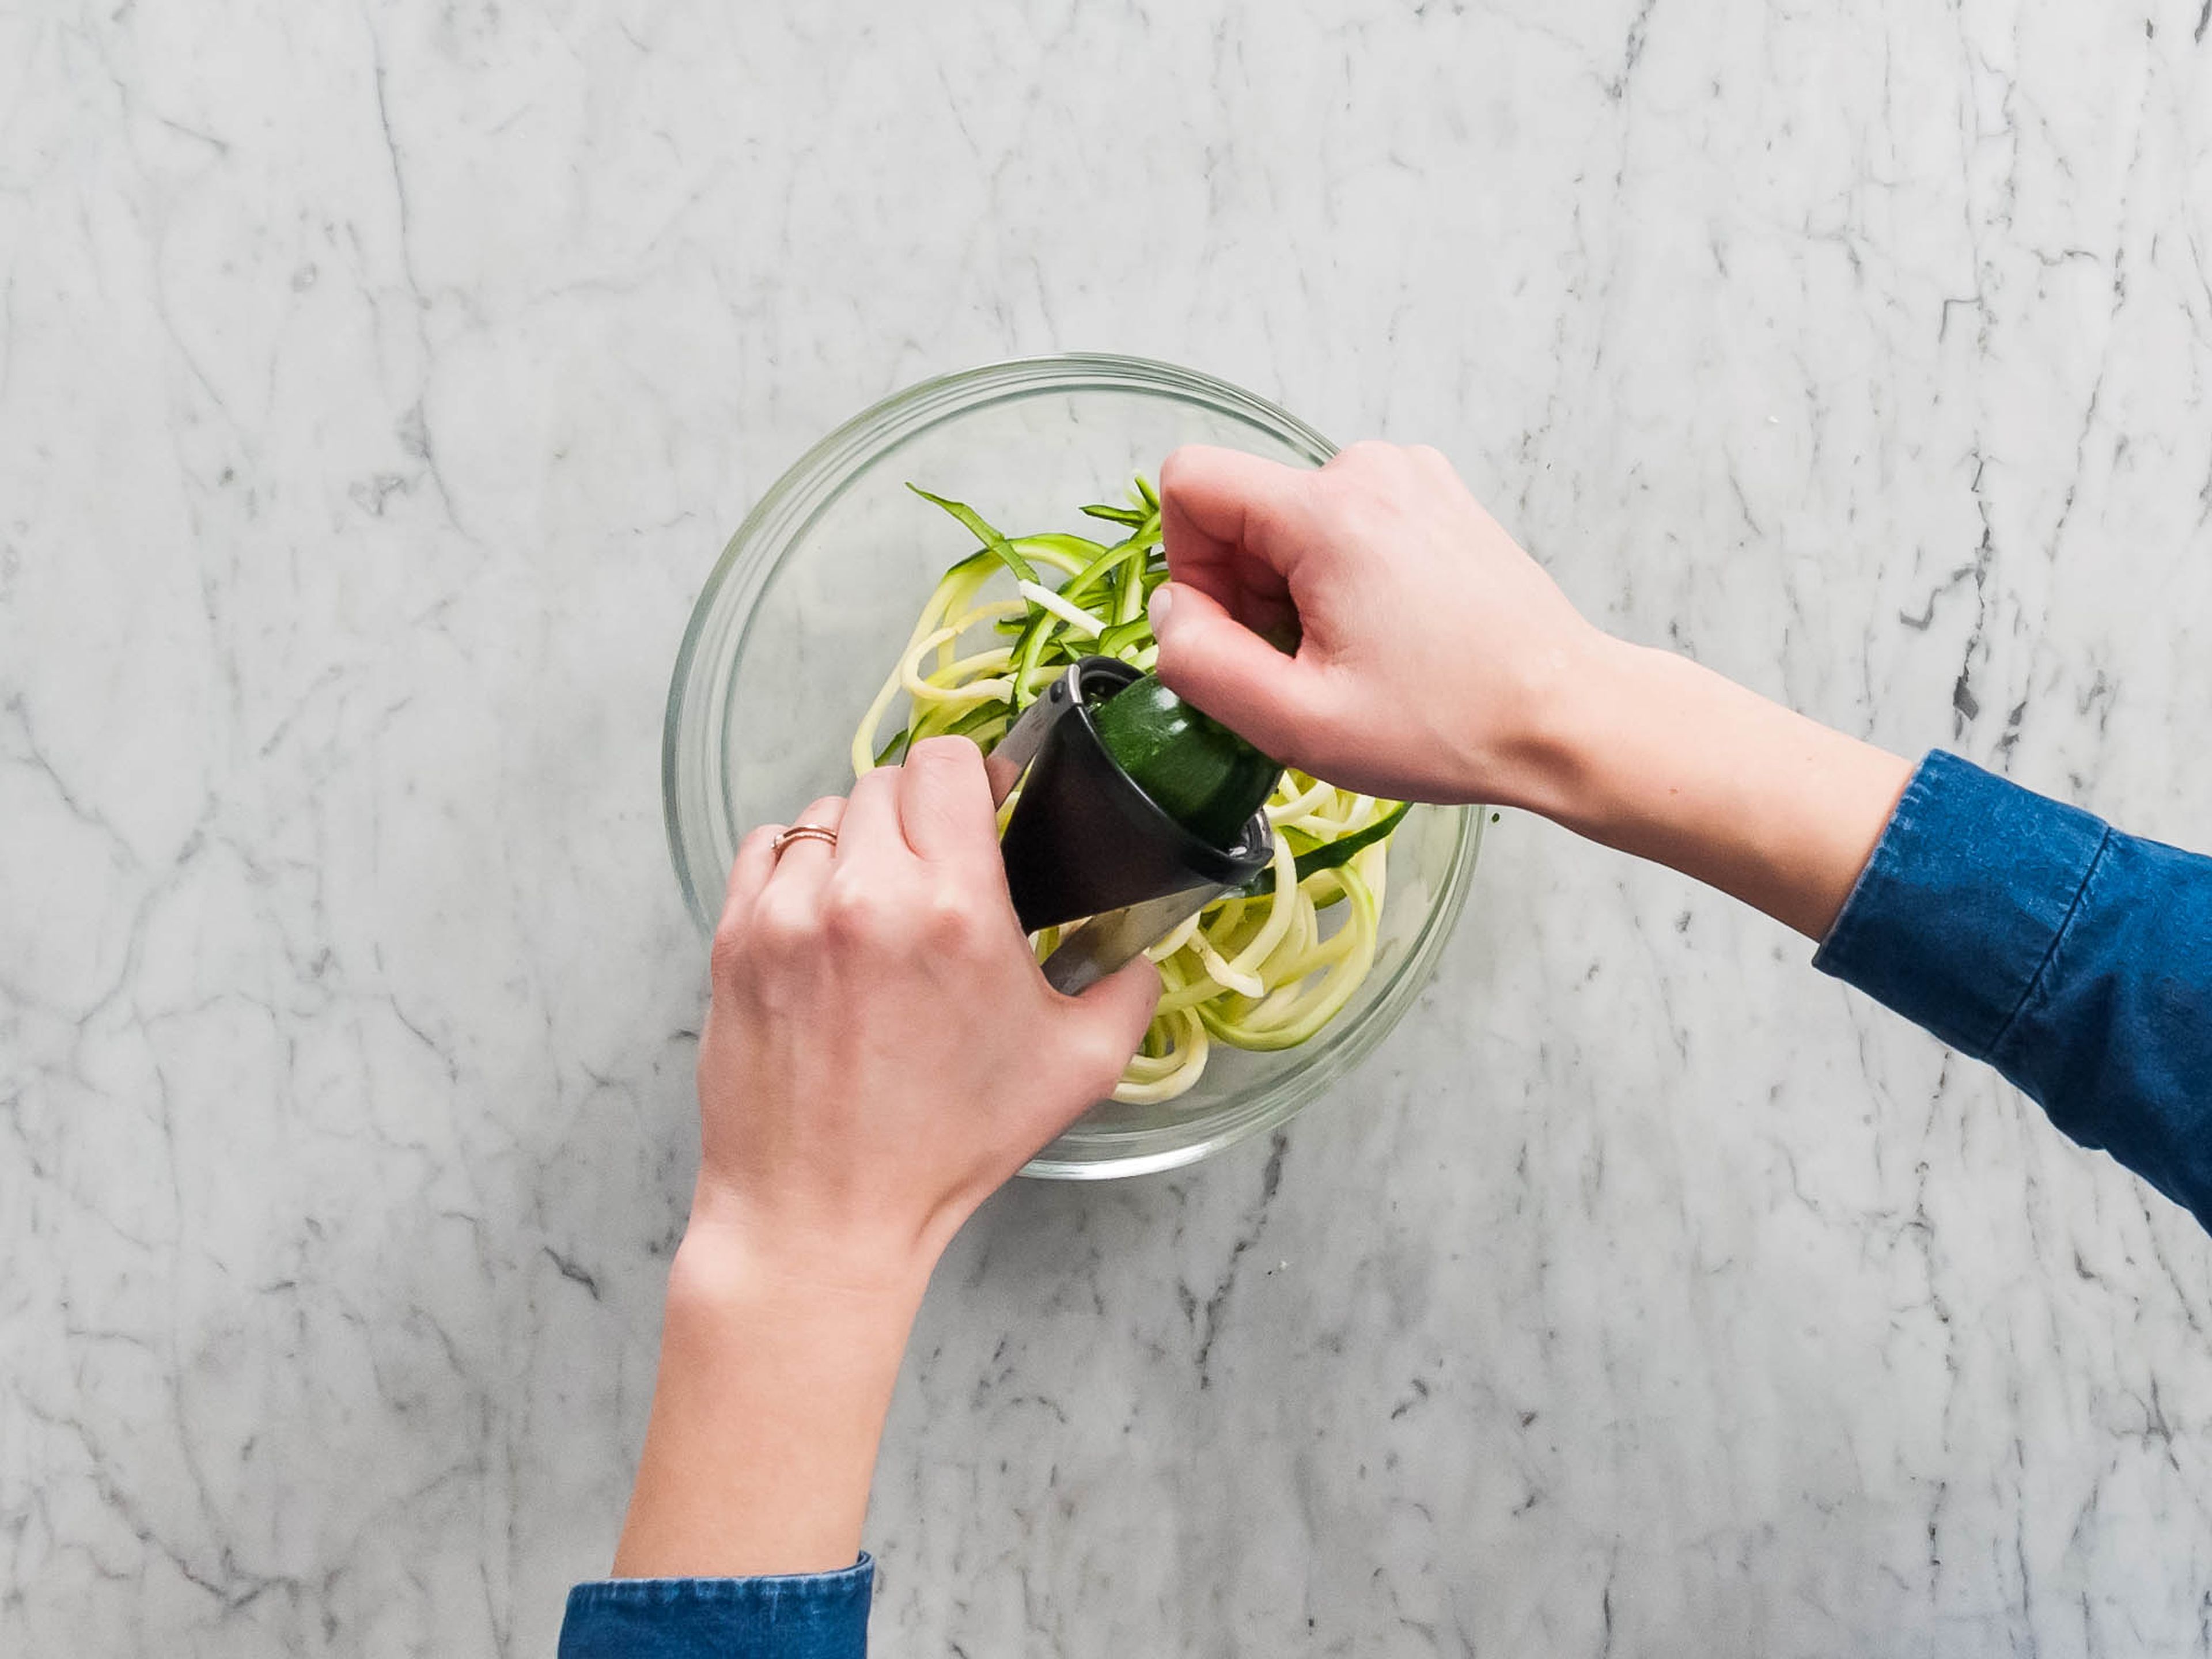 Using a vegetable spiralizer or peeler, cut whole zucchini into spaghetti-like noodles or ribbons.